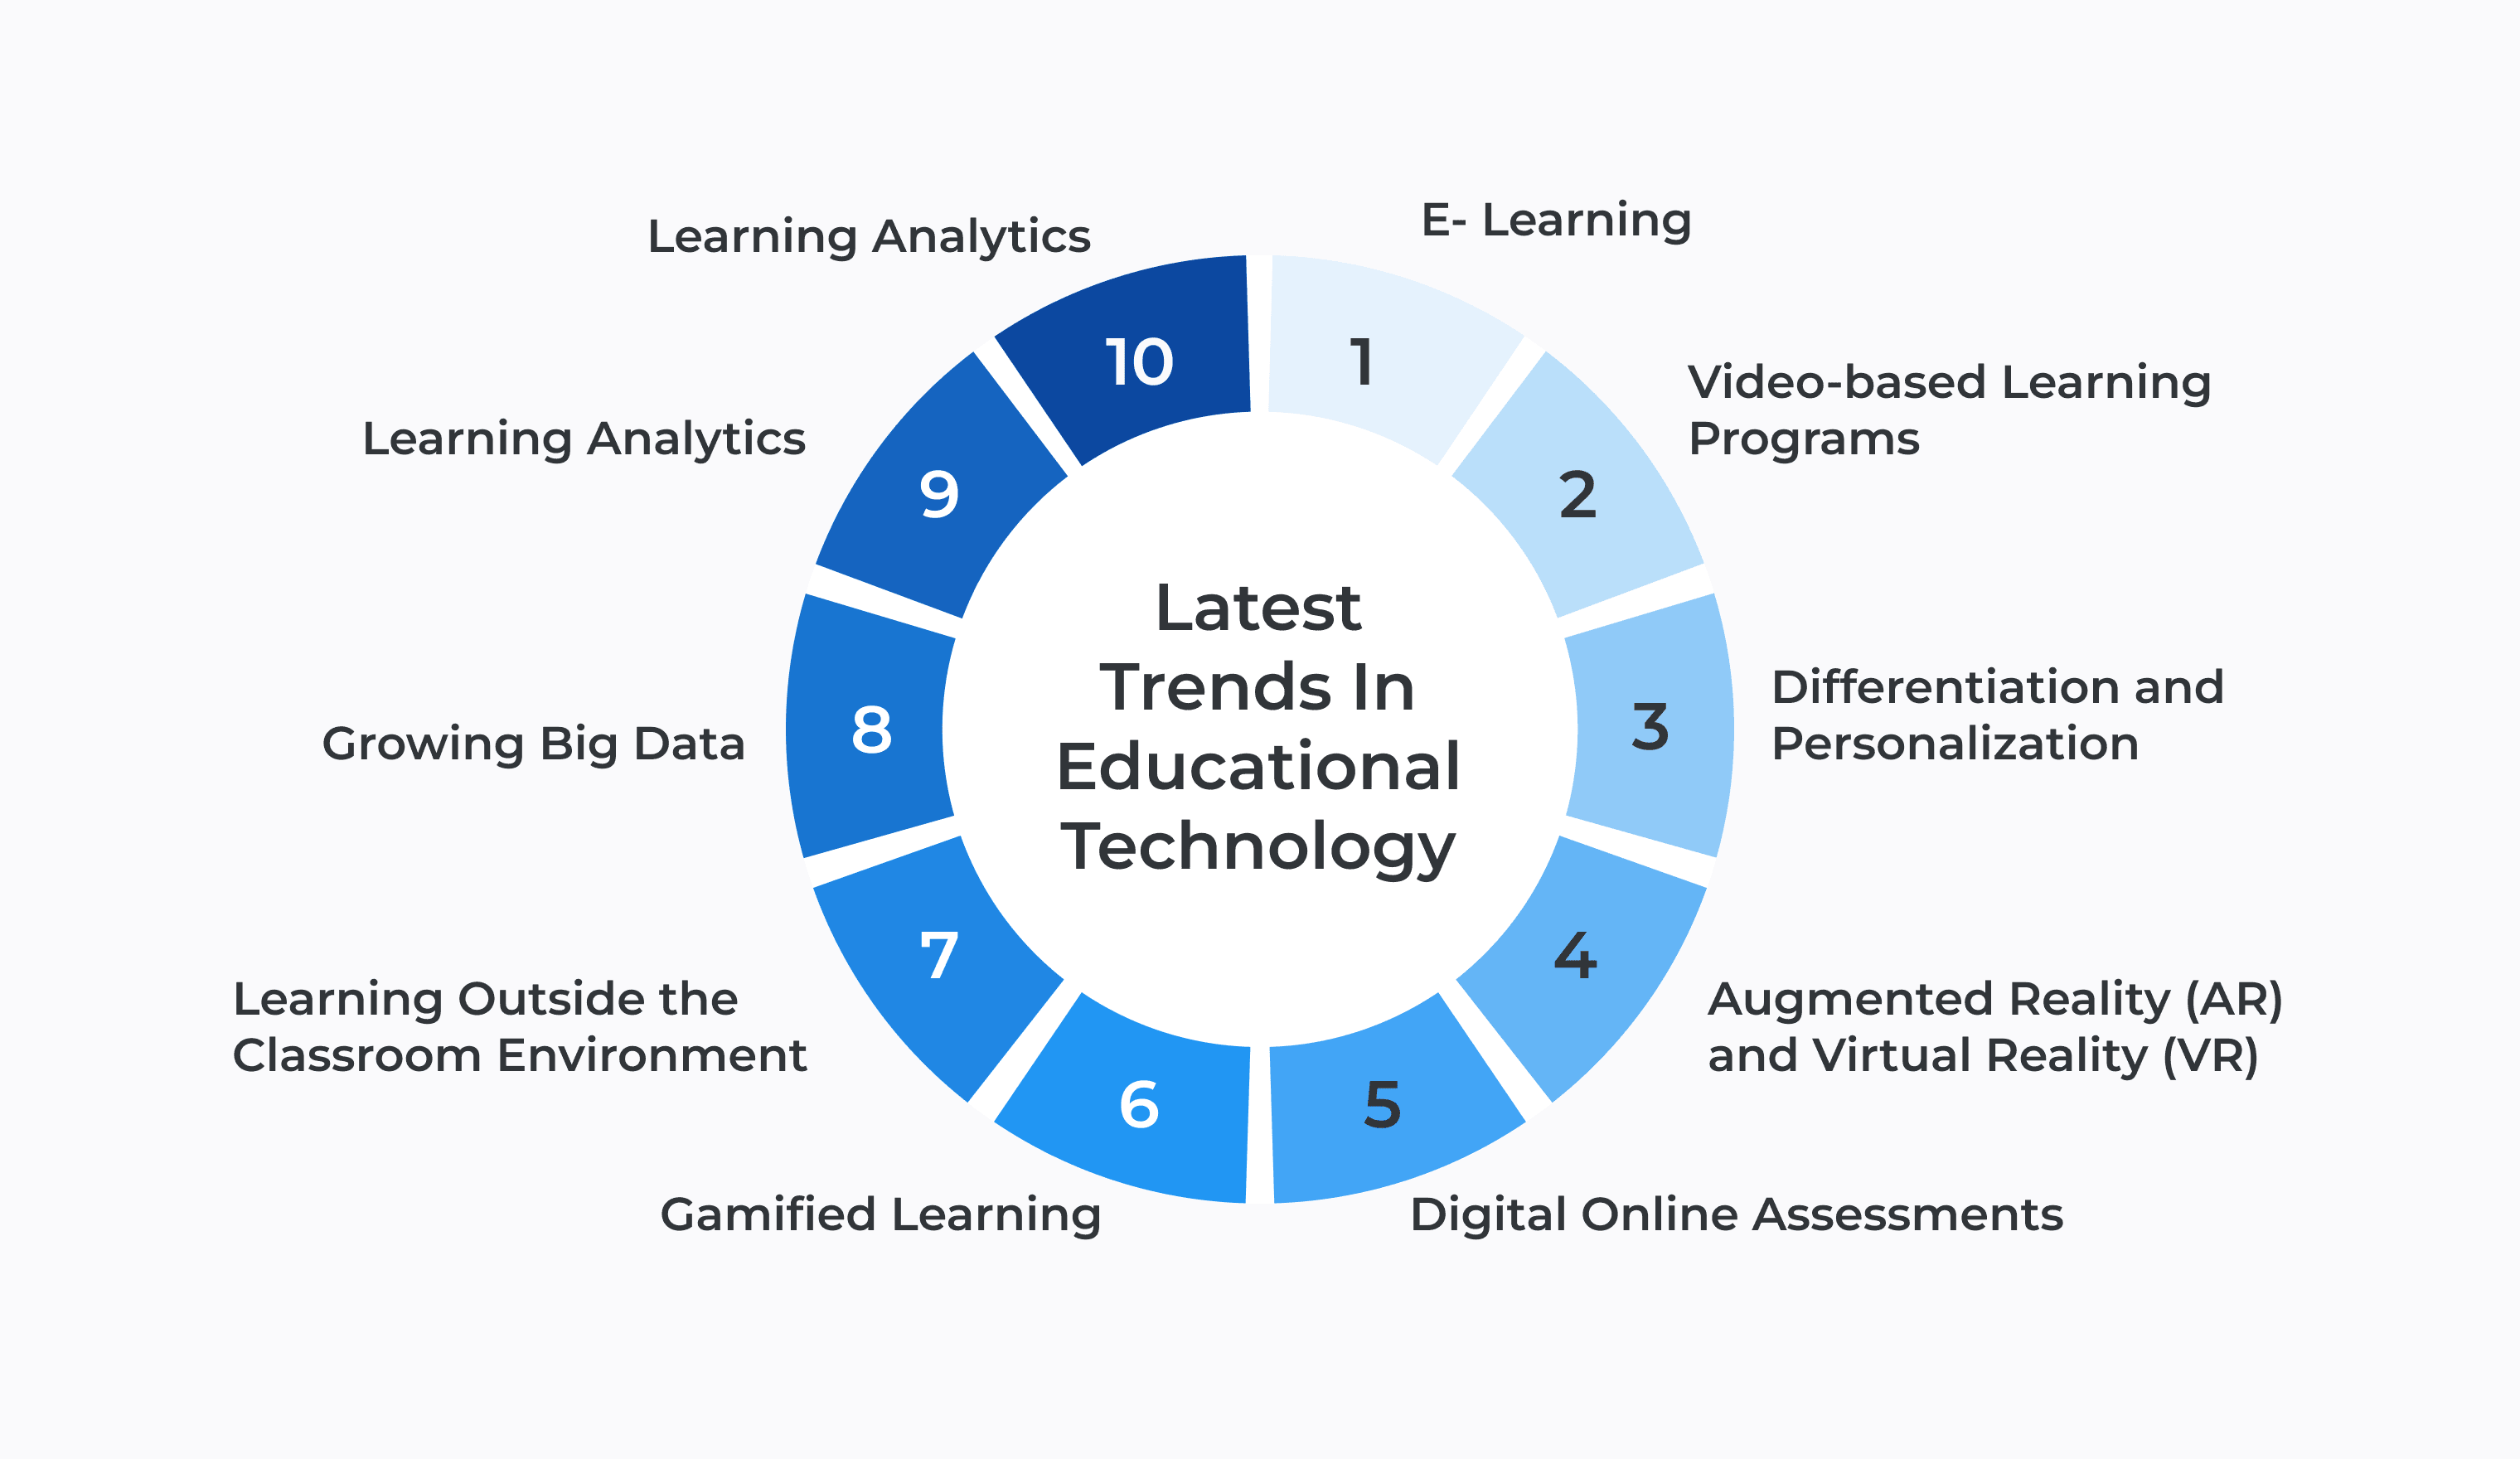 Current Trends In EdTech Apps